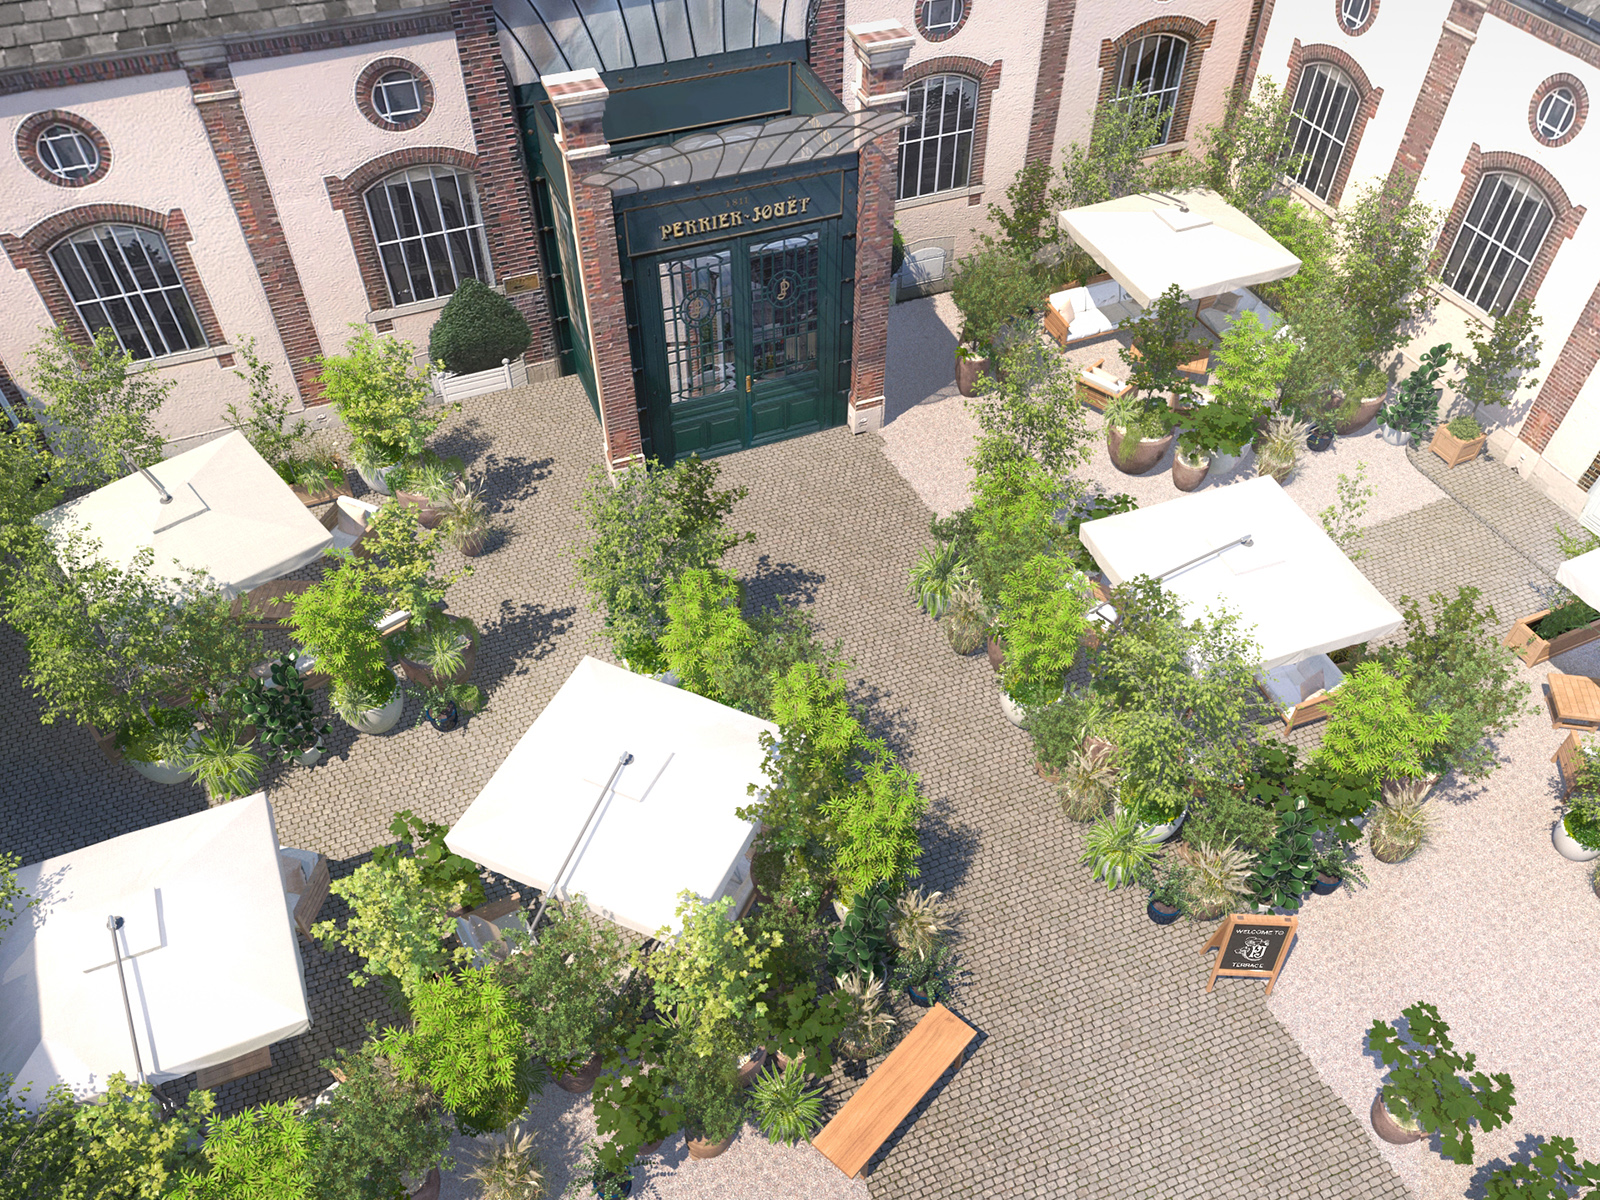 Belle Époque Cellier's outdoor terrace shot from the air featuring shaded tables and greenery